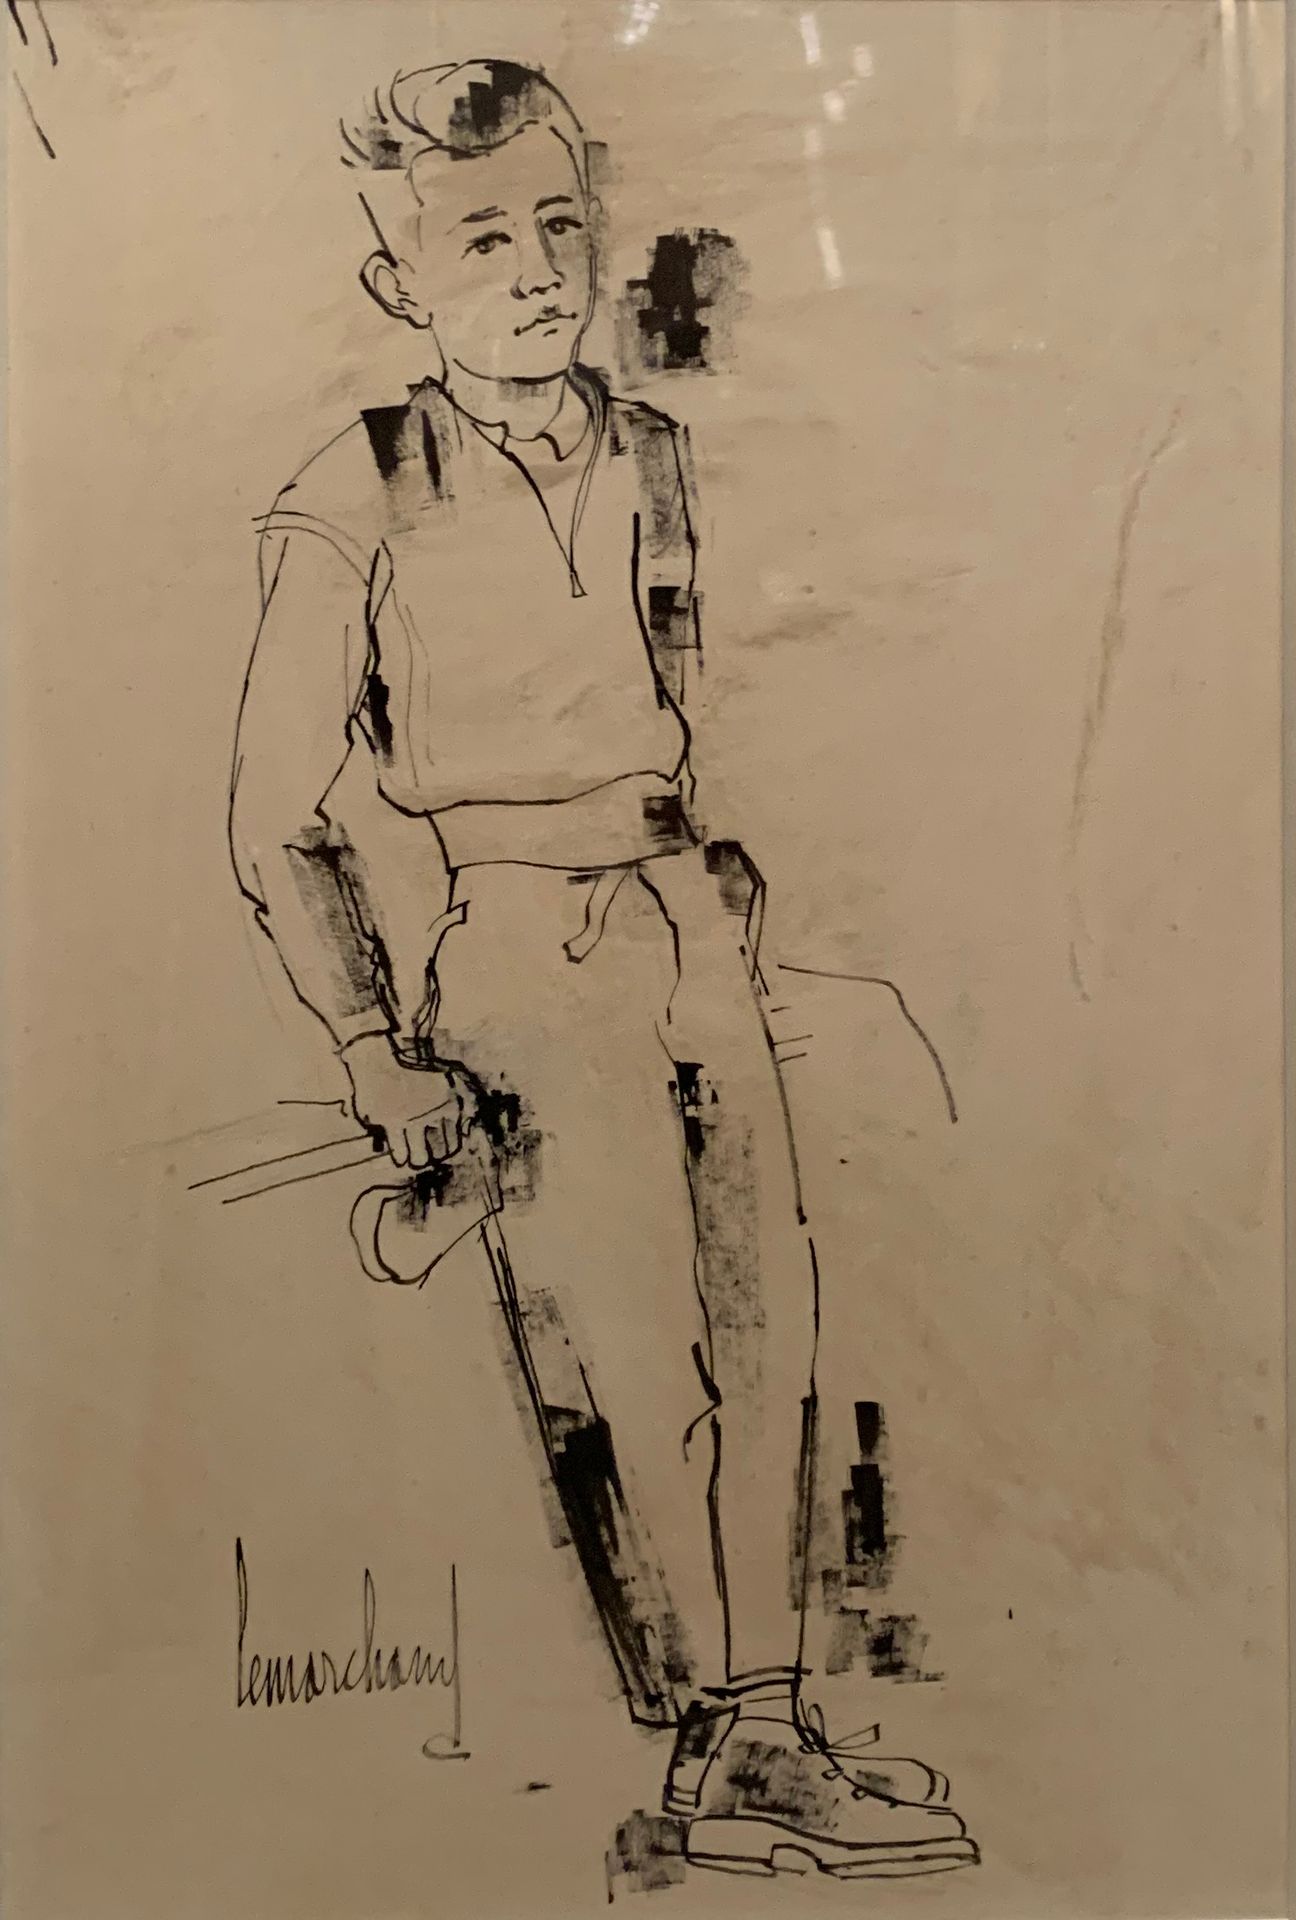 Null Pierre LEMARCHAND (1906-1970)

Portrait of a young man in feet

Ink signed &hellip;